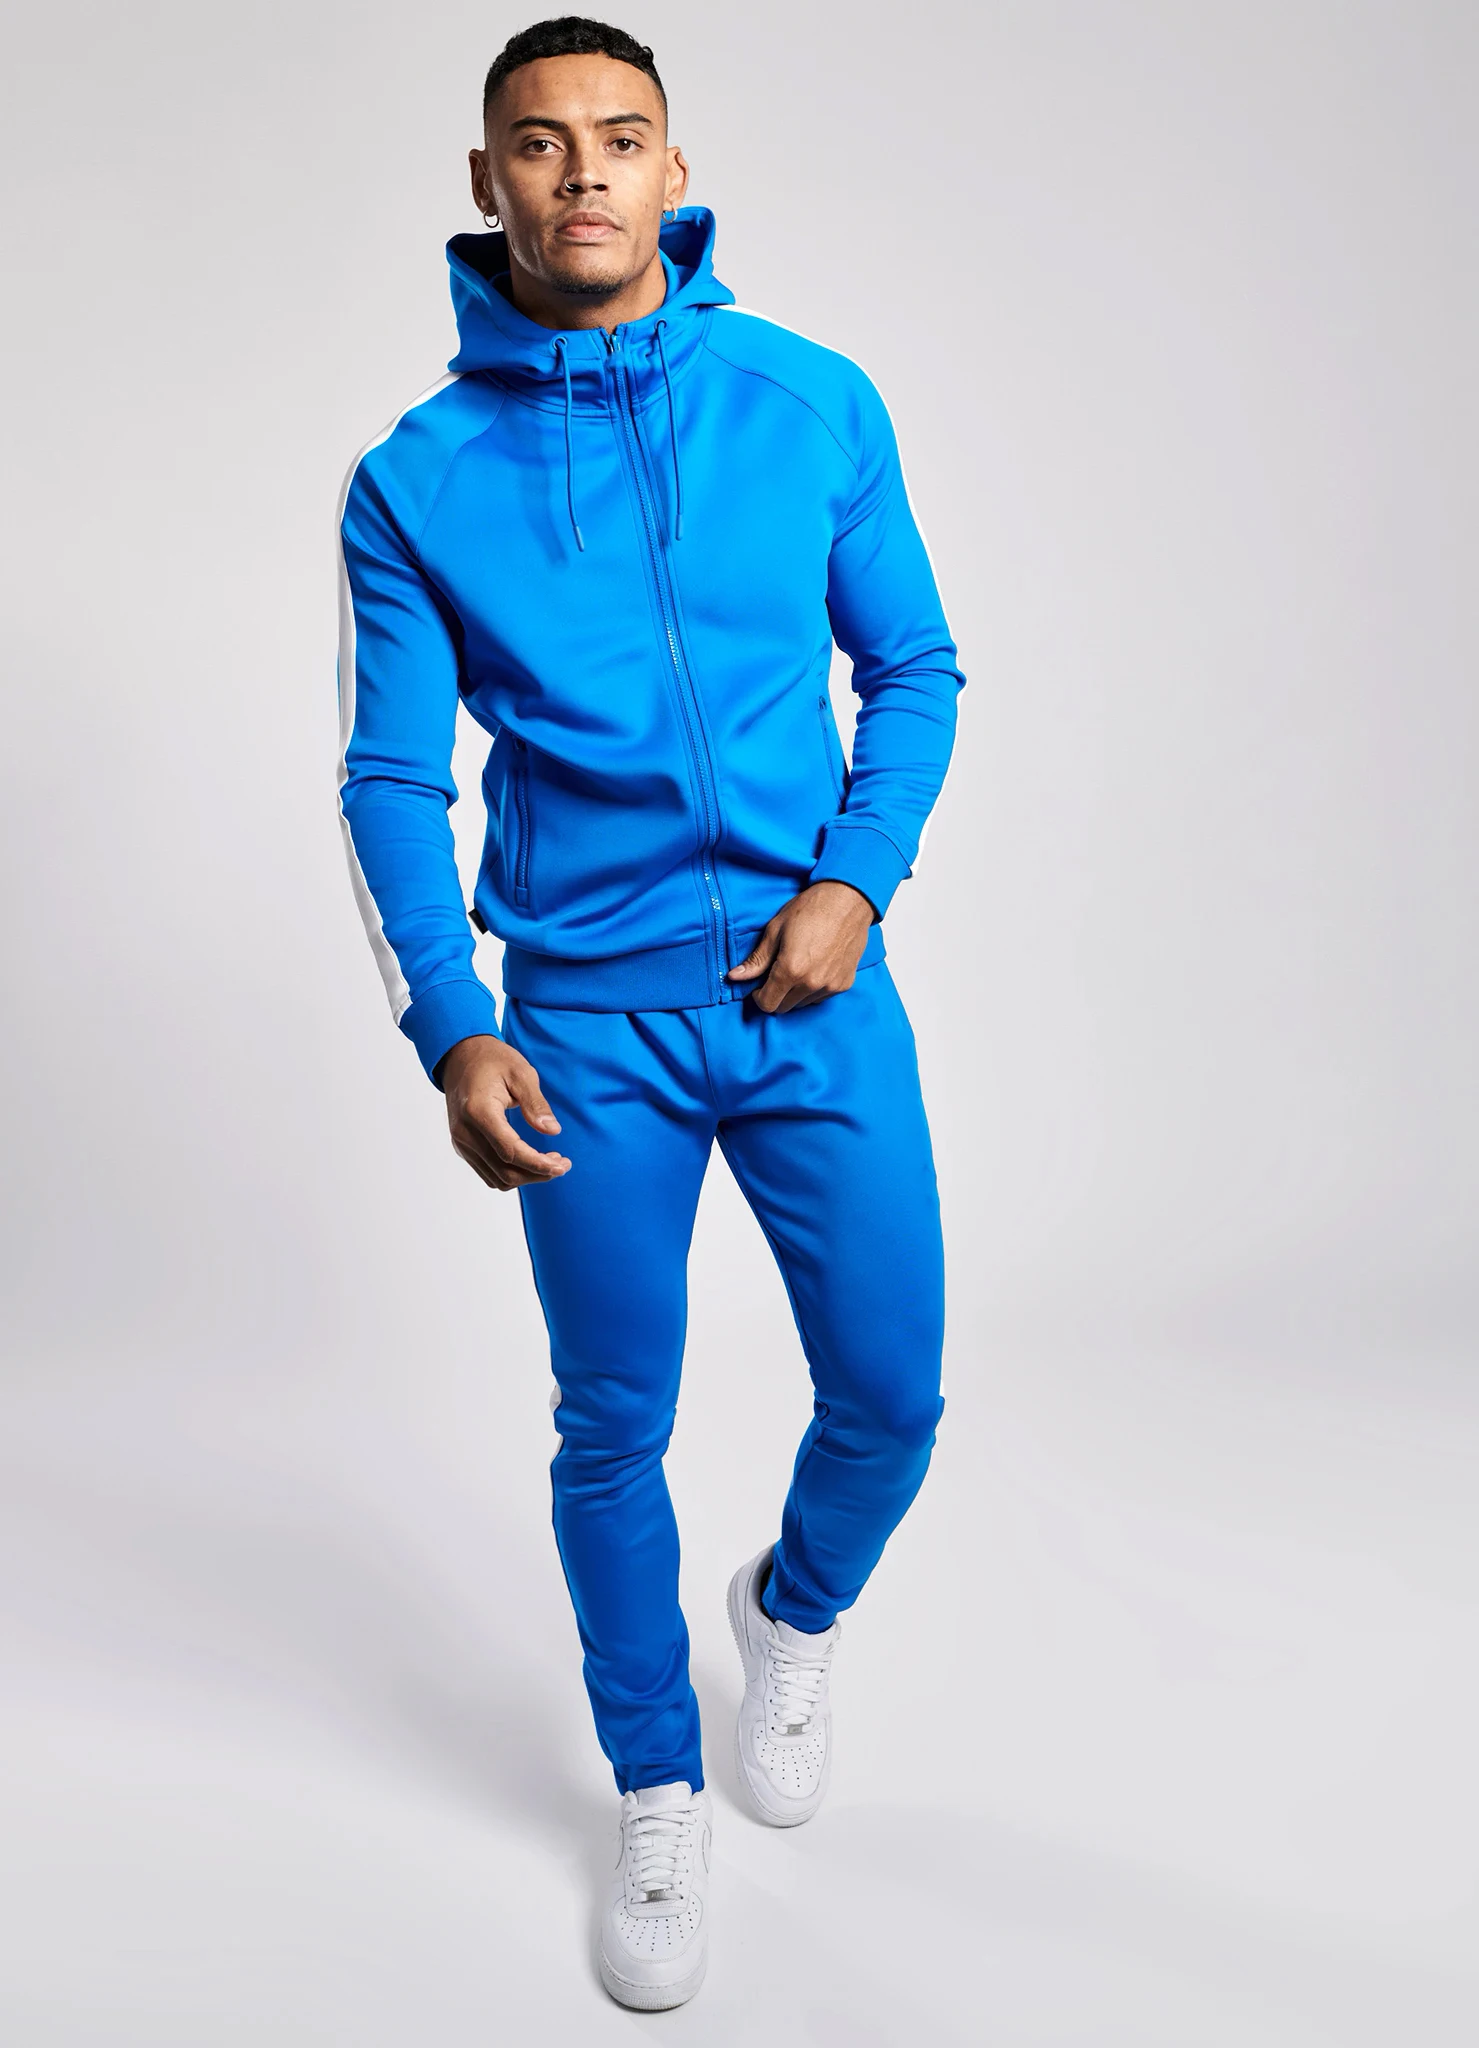 Sweat Suit Sportswear Most Selling Latest Jogging Athletic Slim Fit ...